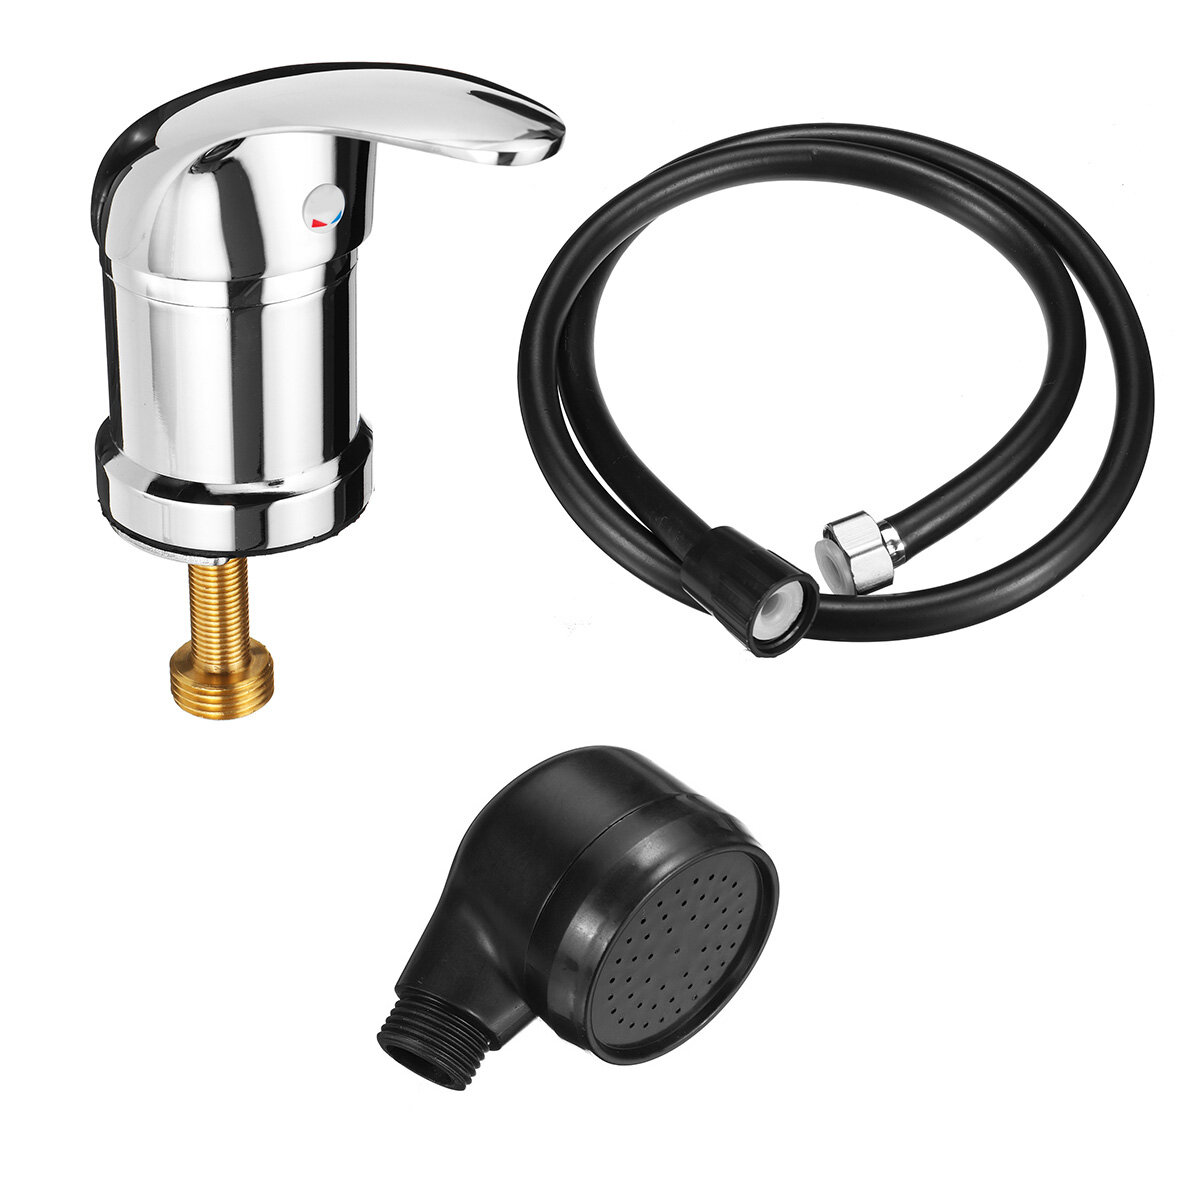 Image of 1/2'' Beauty Salon Shampoo Bowl Sink Hot Cold Faucet Spray Hose Replacement Set